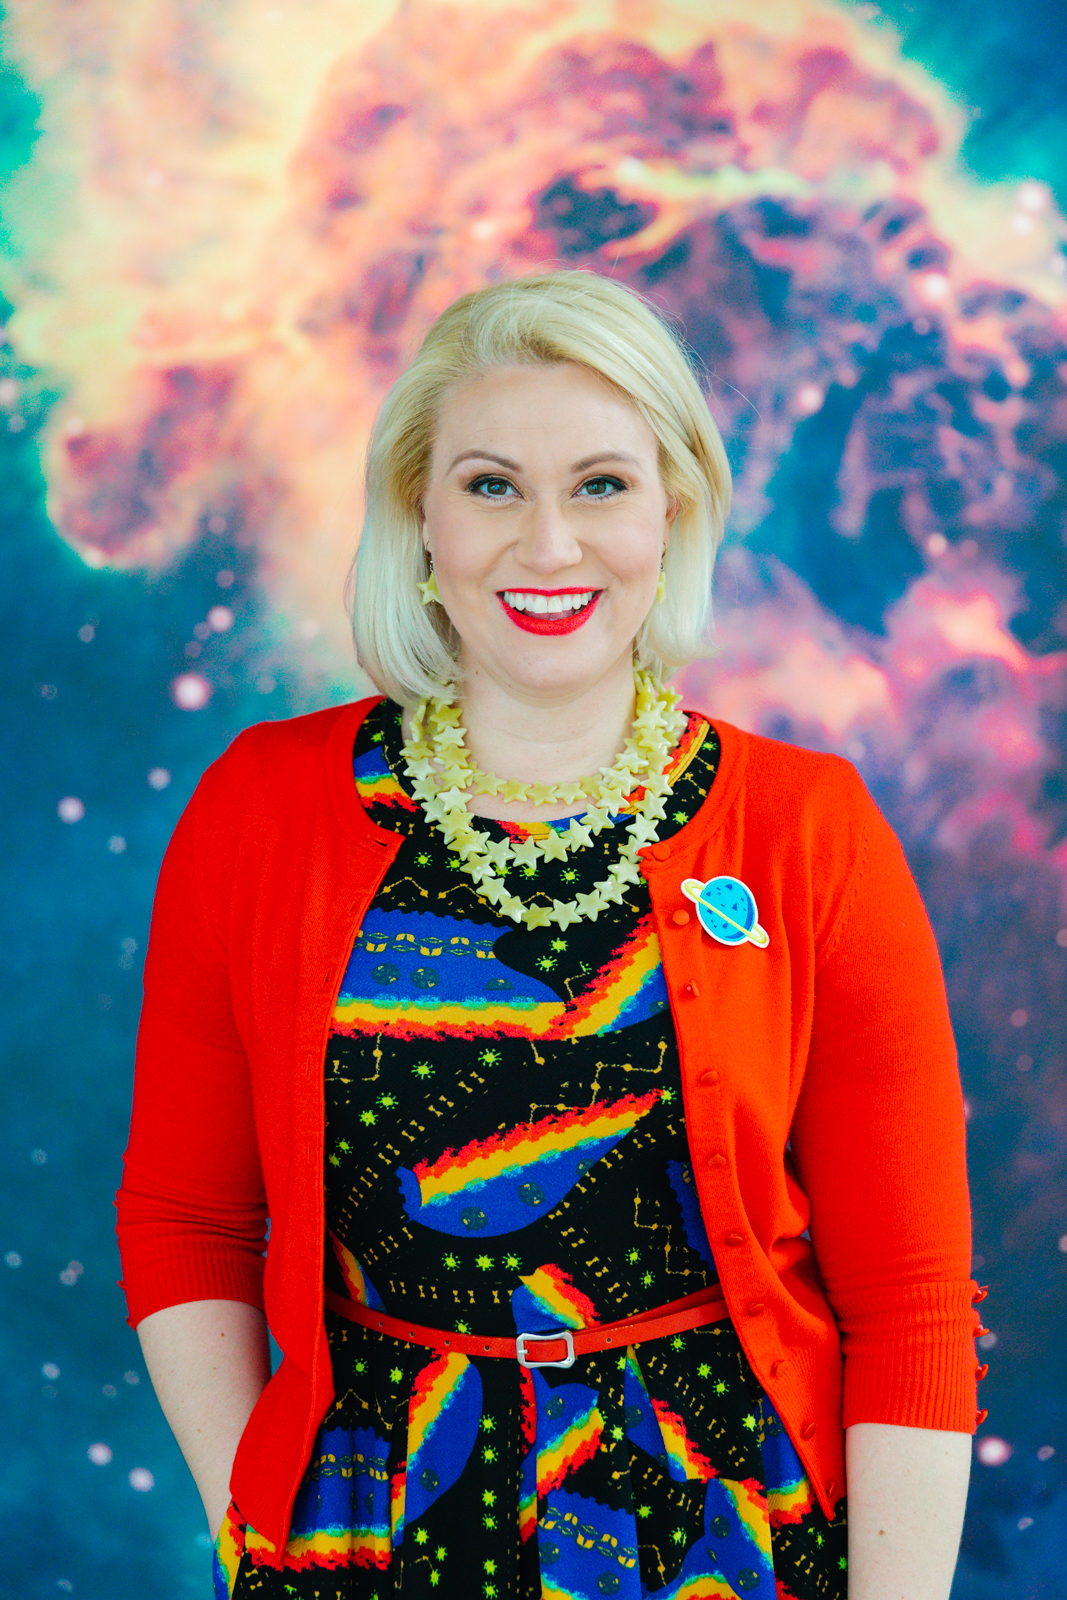 Event Planner Holly Gray wearing bright red cardigan and planet pin stands in front of SKETCH Foundation Air and Space signage featuring image of space